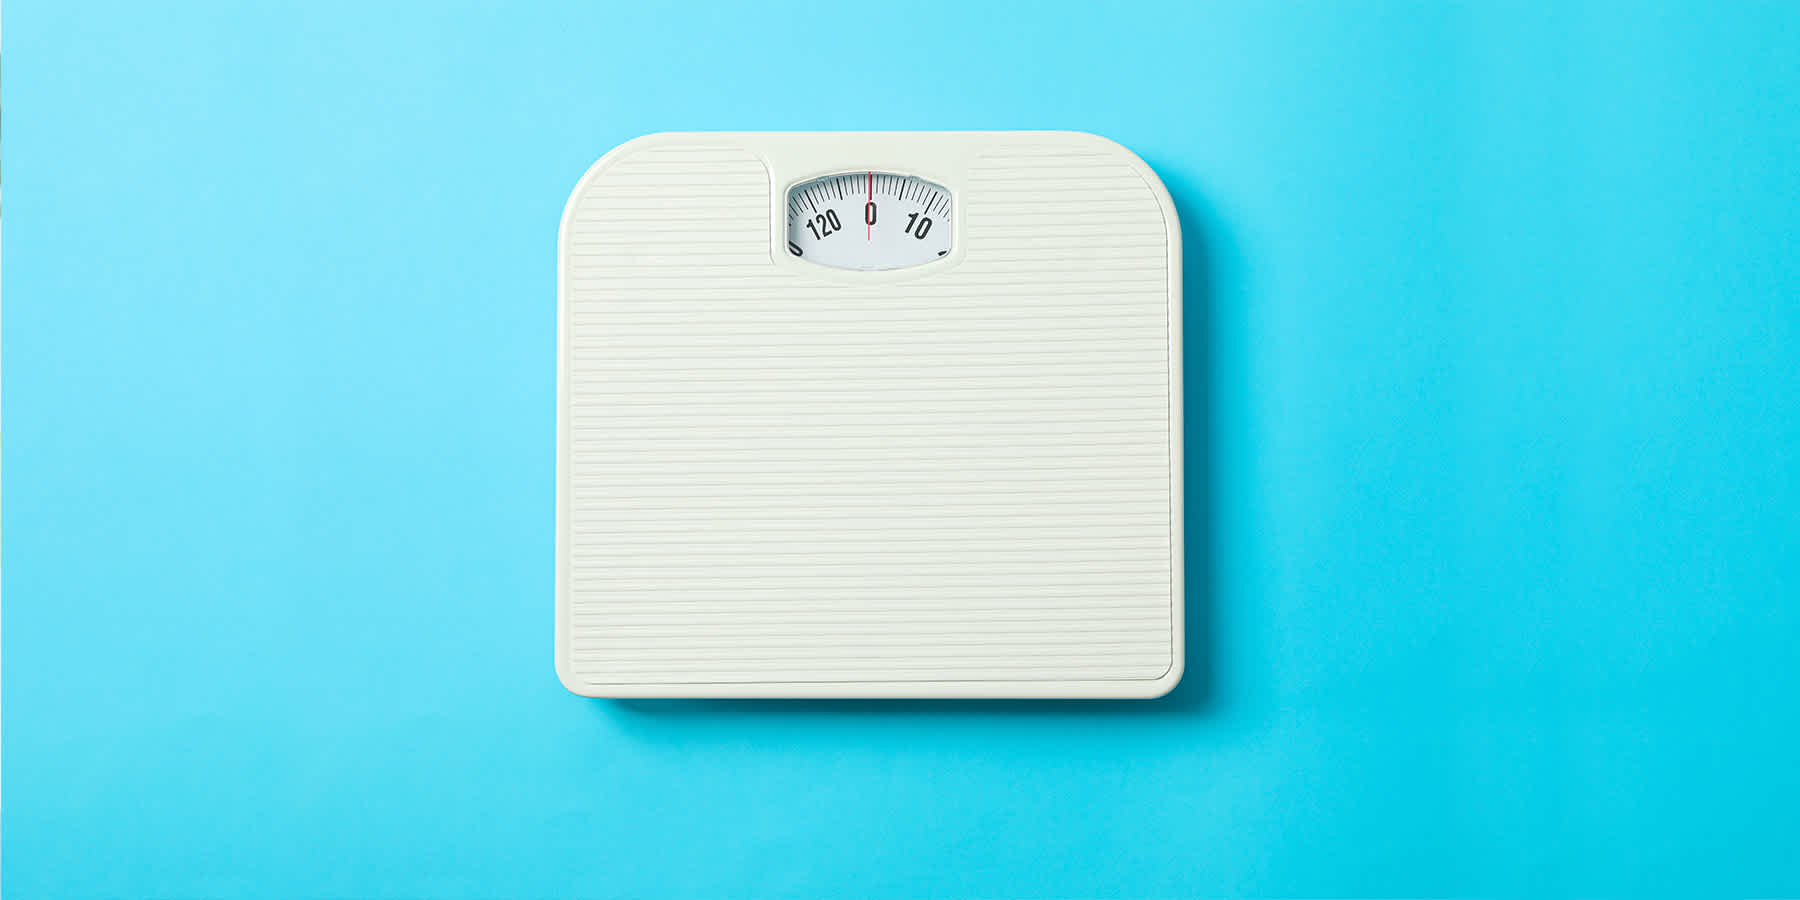 Bathroom scale to check weight when using an online weight management program